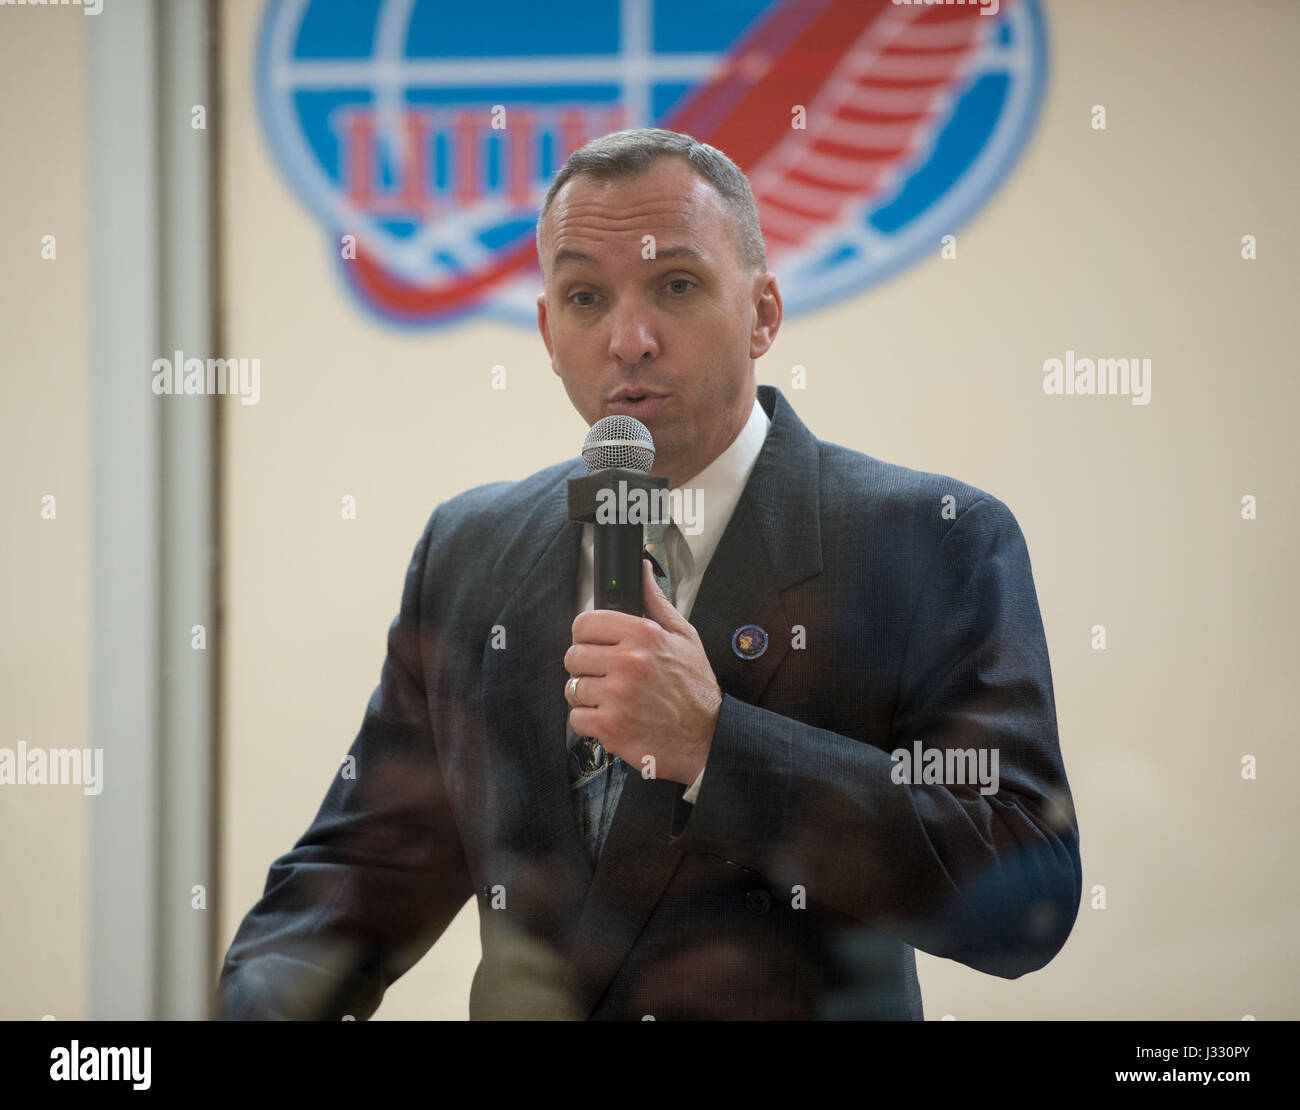 NASA Expedition 51 backup crew member Randy Bresnik speaks during the State Commission meeting to approve the Soyuz launch of Expedition 51 to the International Space Station, Wednesday, April 19, 2017 at the Cosmonaut Hotel in Baikonur, Kazakhstan.  The mission is set to launch April 20 from the Baikonur Cosmodrome.  Photo Credit: (NASA/Aubrey Gemignani) Stock Photo